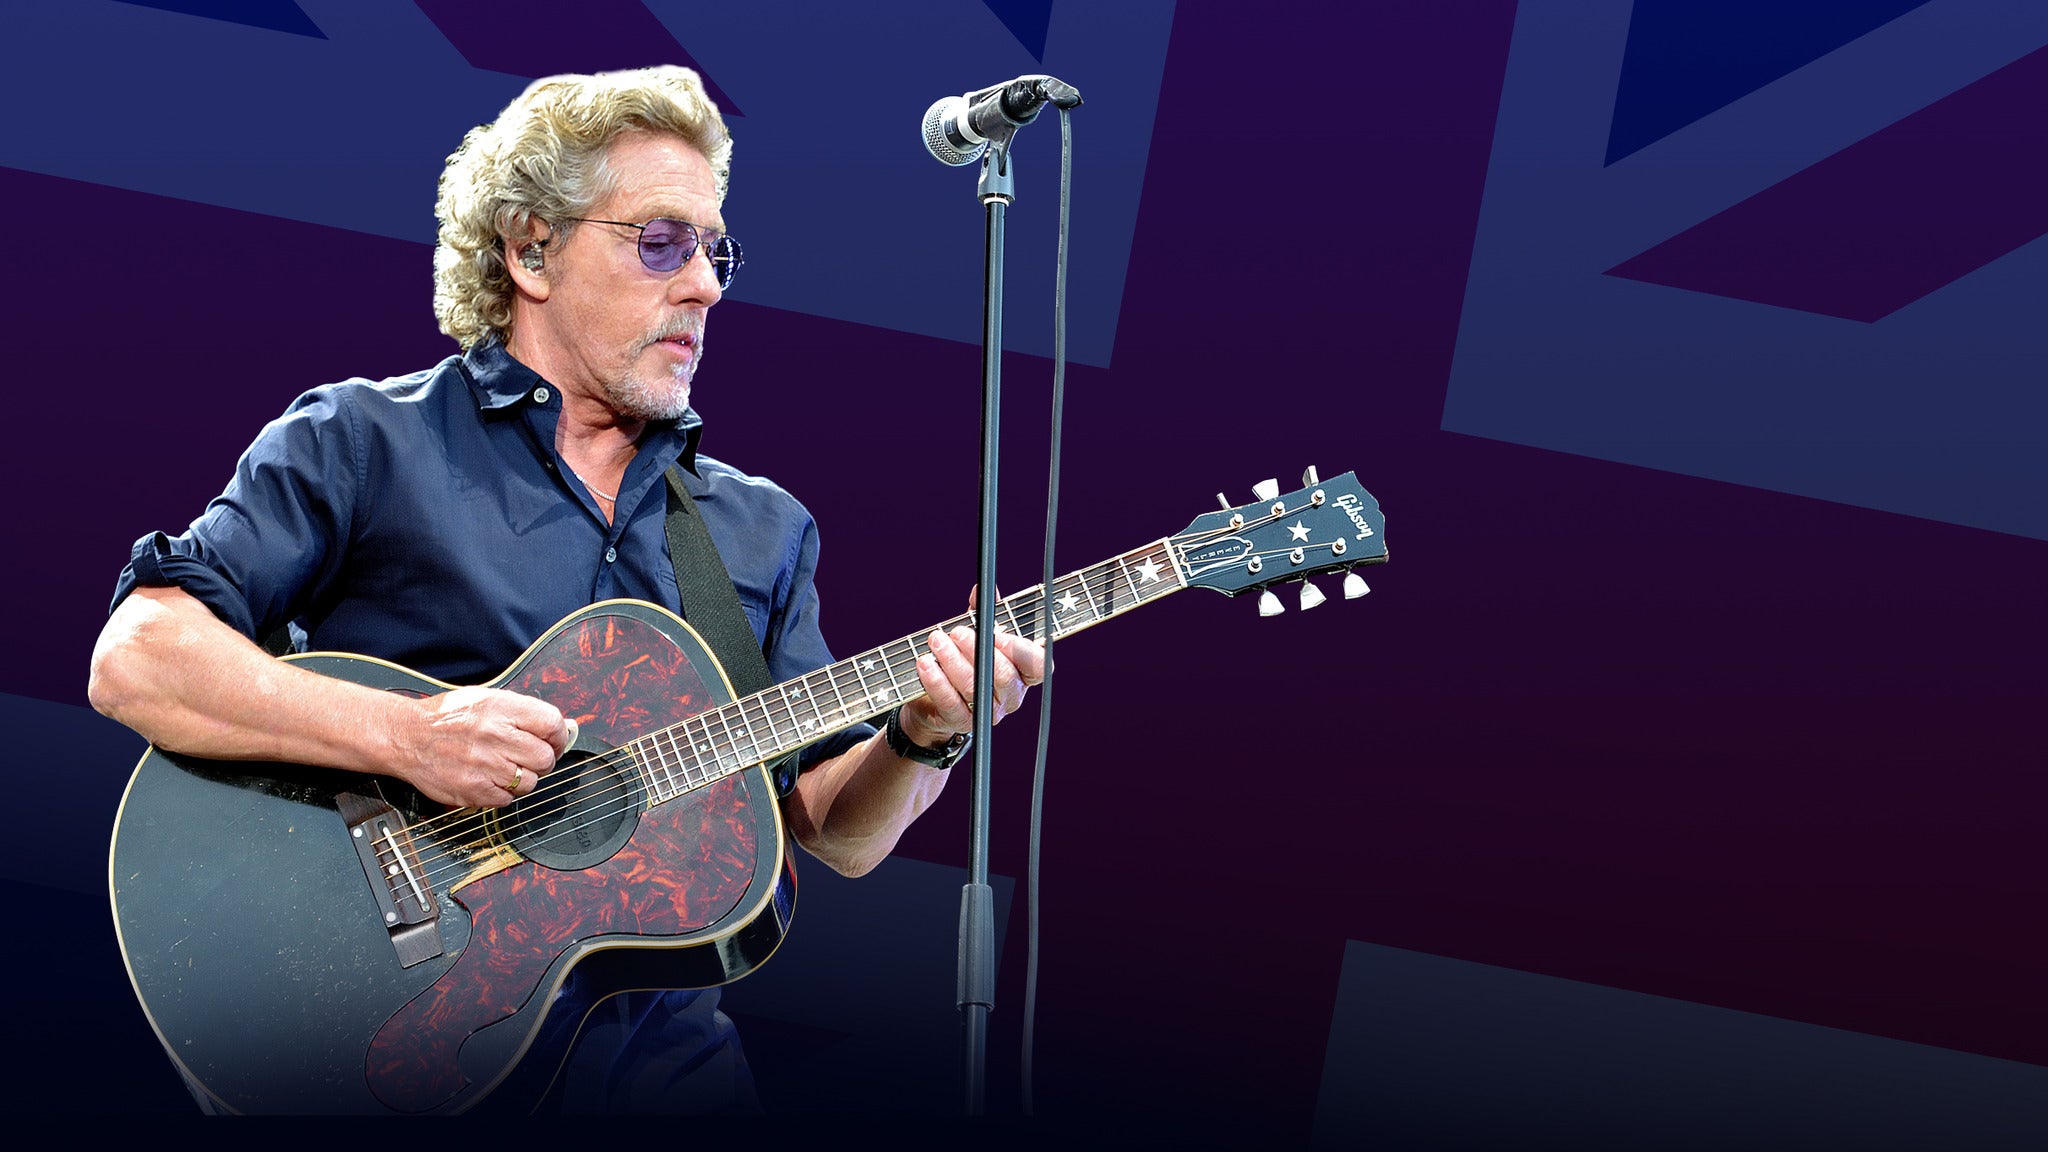 Roger Daltrey - Hits and Rarities of The Who and Roger Daltrey in Costa Mesa promo photo for Pacific Amphitheatre presale offer code